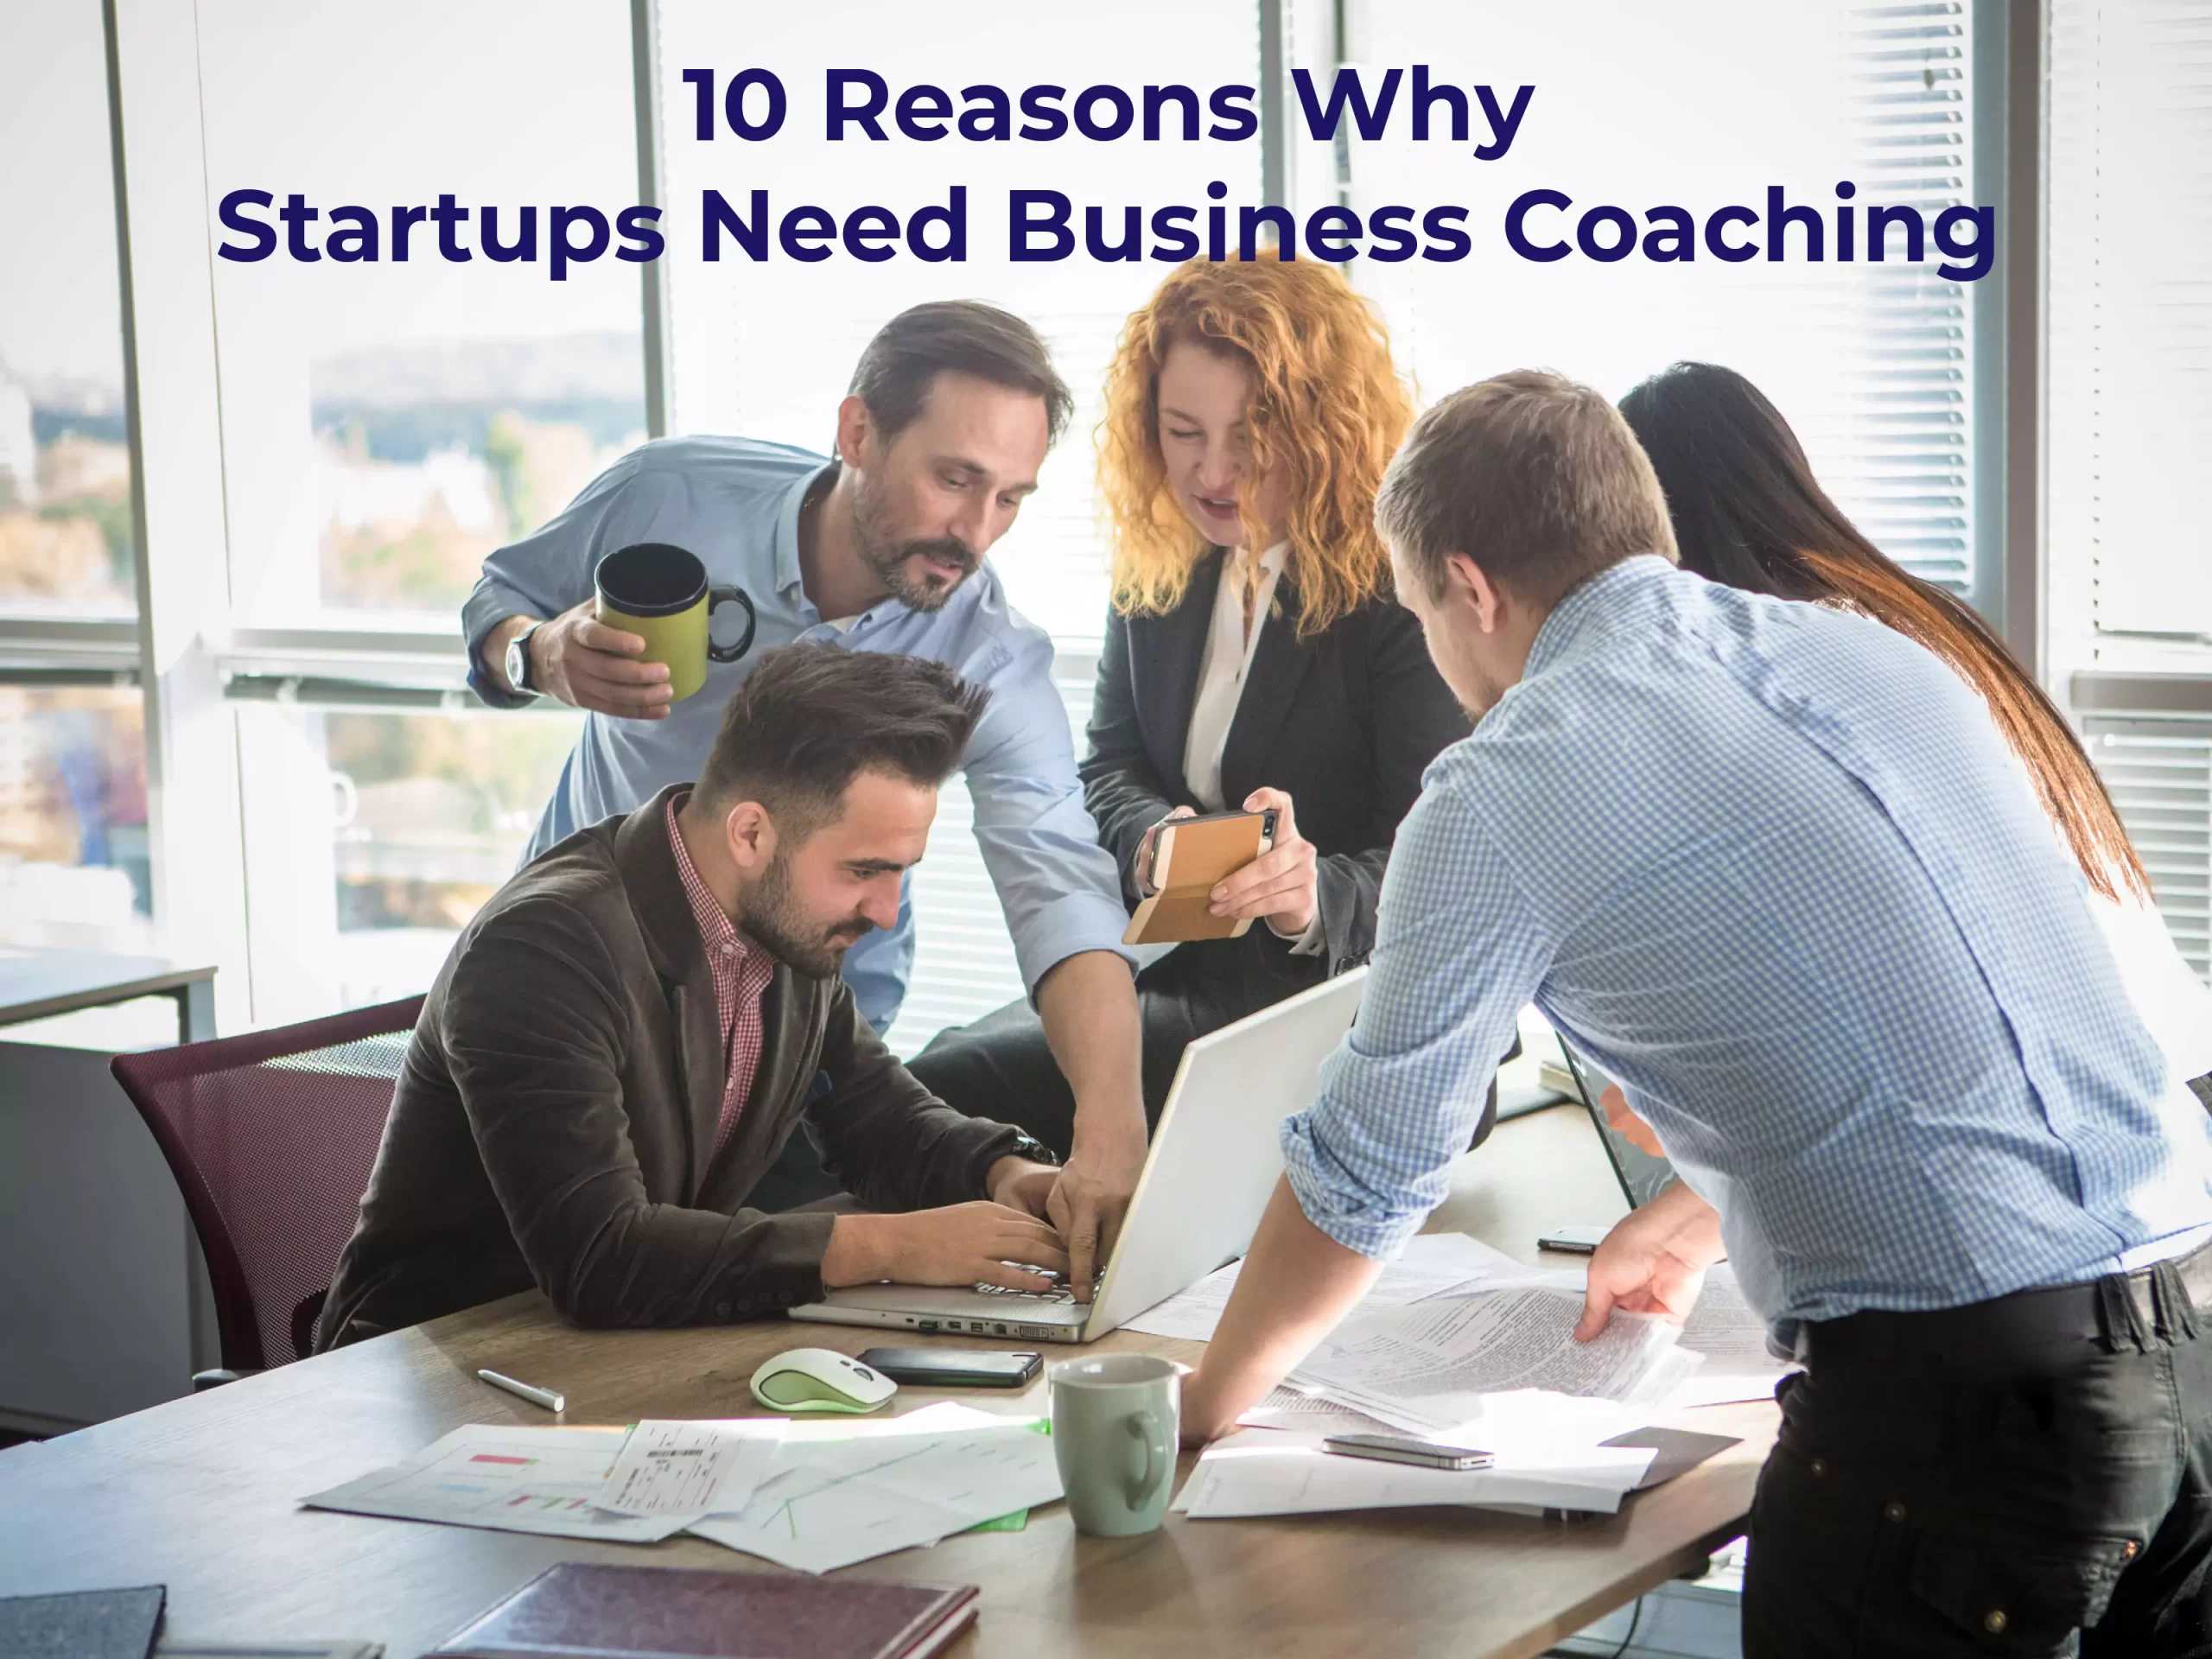 10 Reasons Why Startups Need Business Coaching